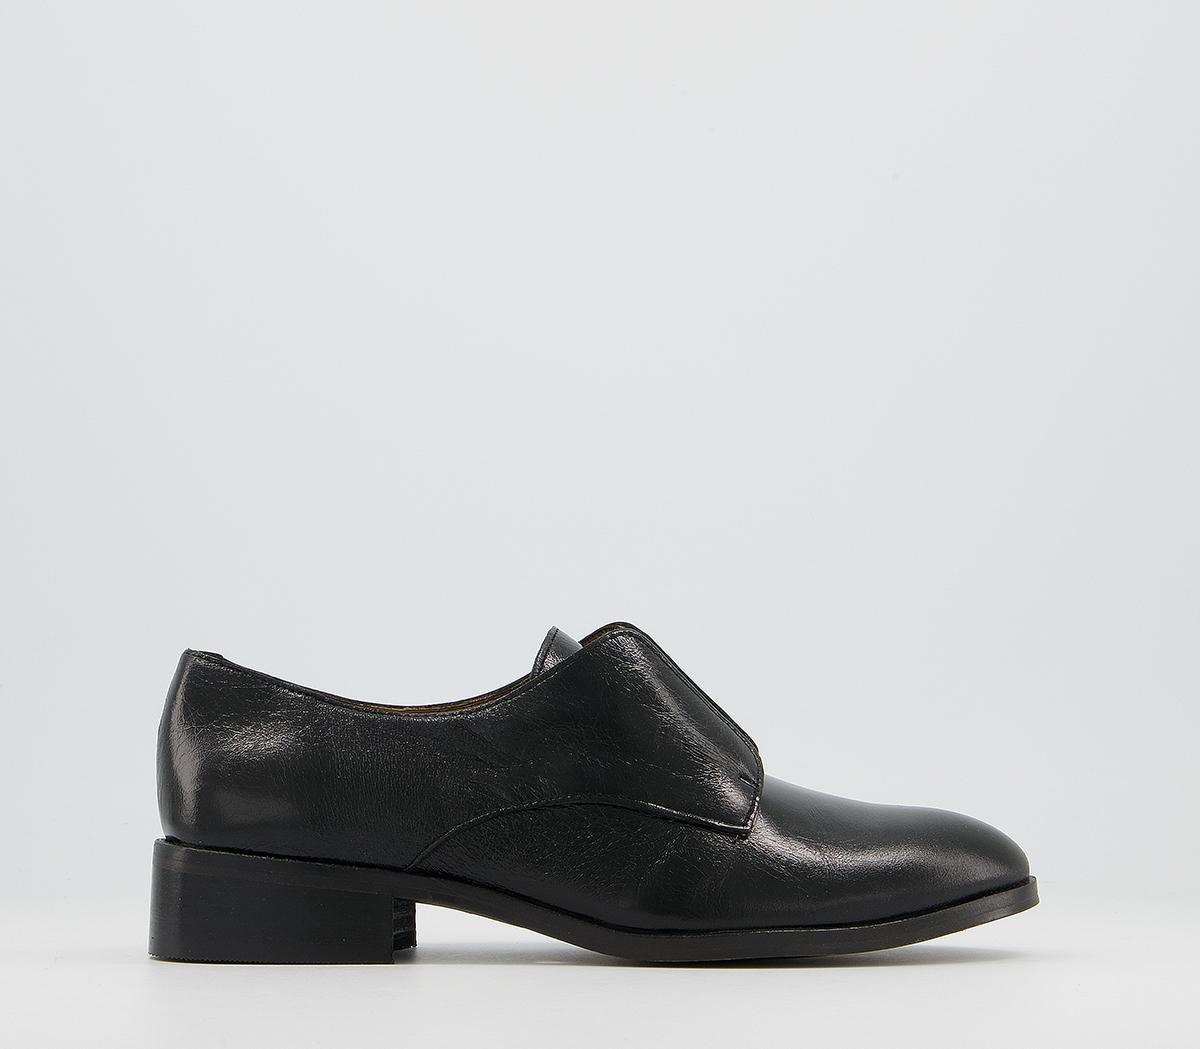 OFFICEFirm Feature Slip On FlatsBlack Leather Gold Hardware